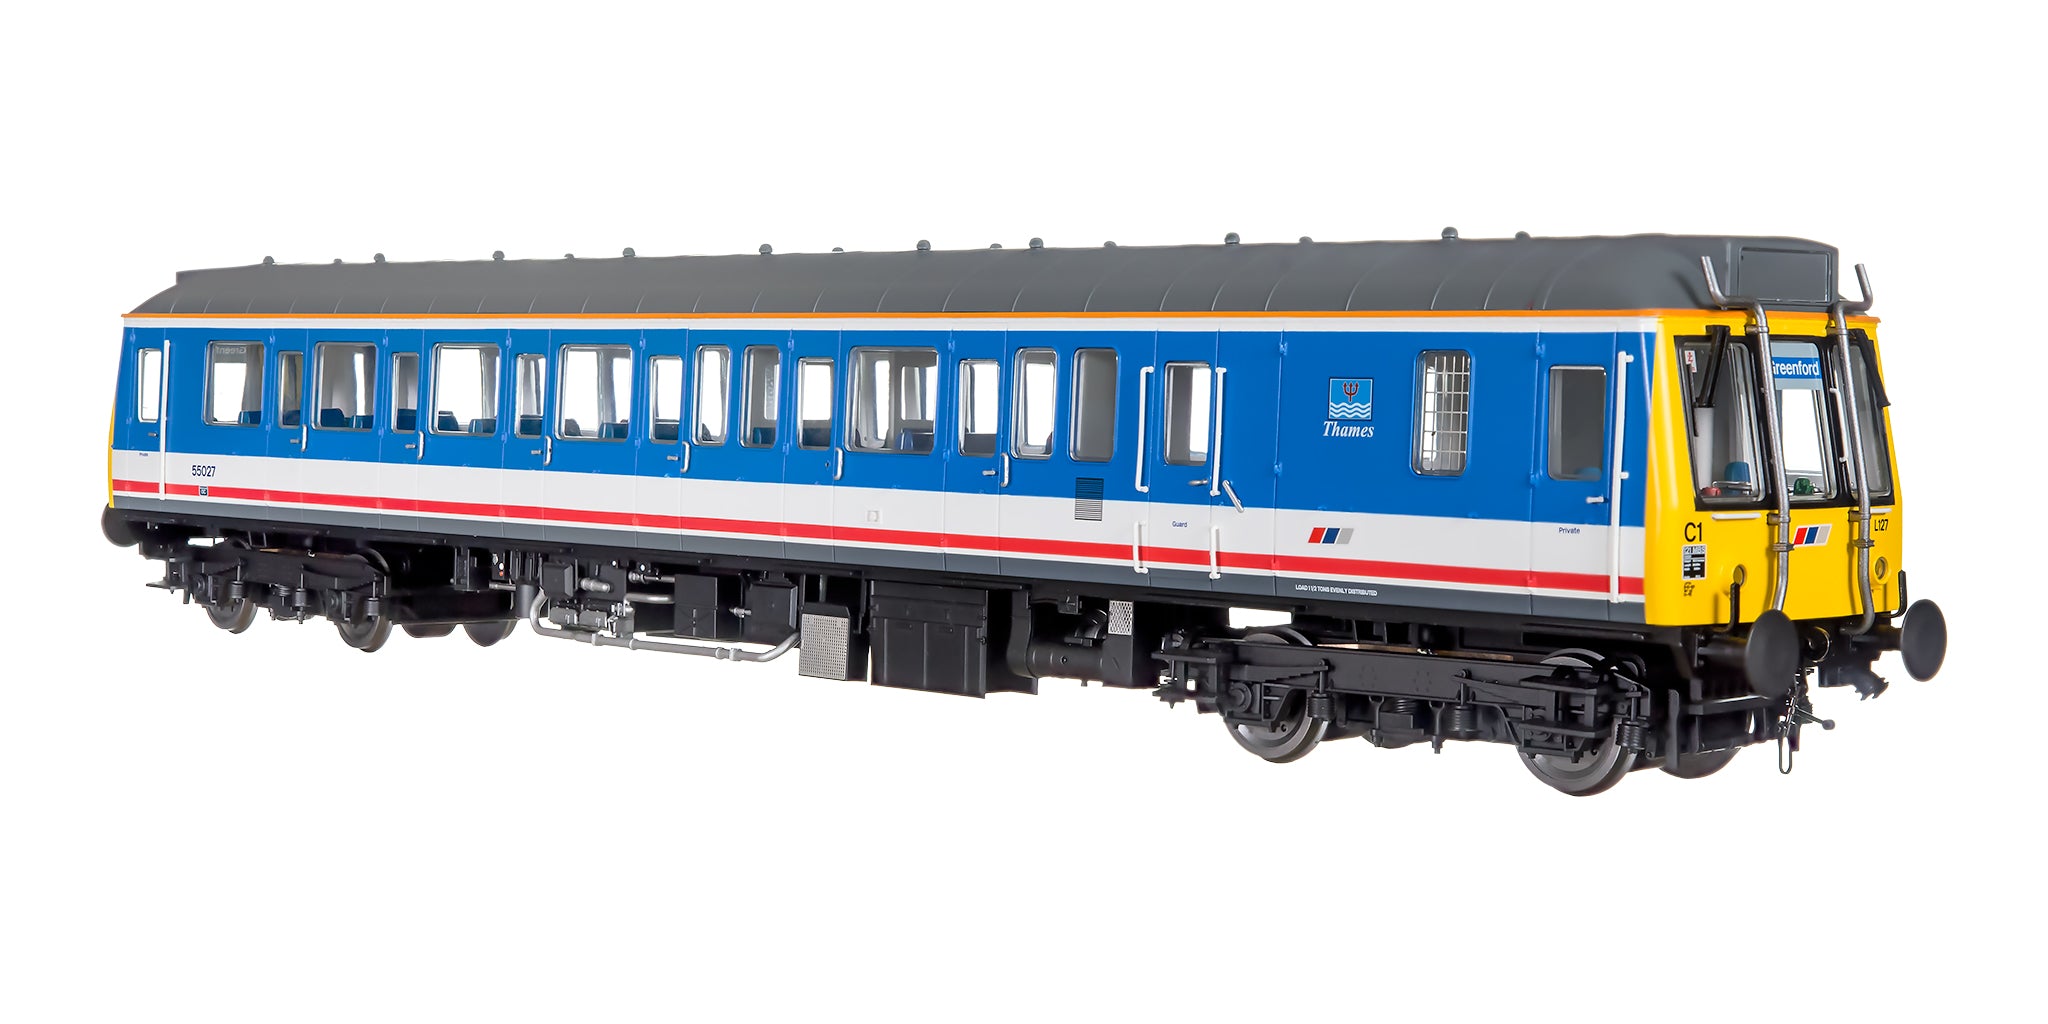 7D-009-009 O Gauge Class 121 55027 NSE Revised